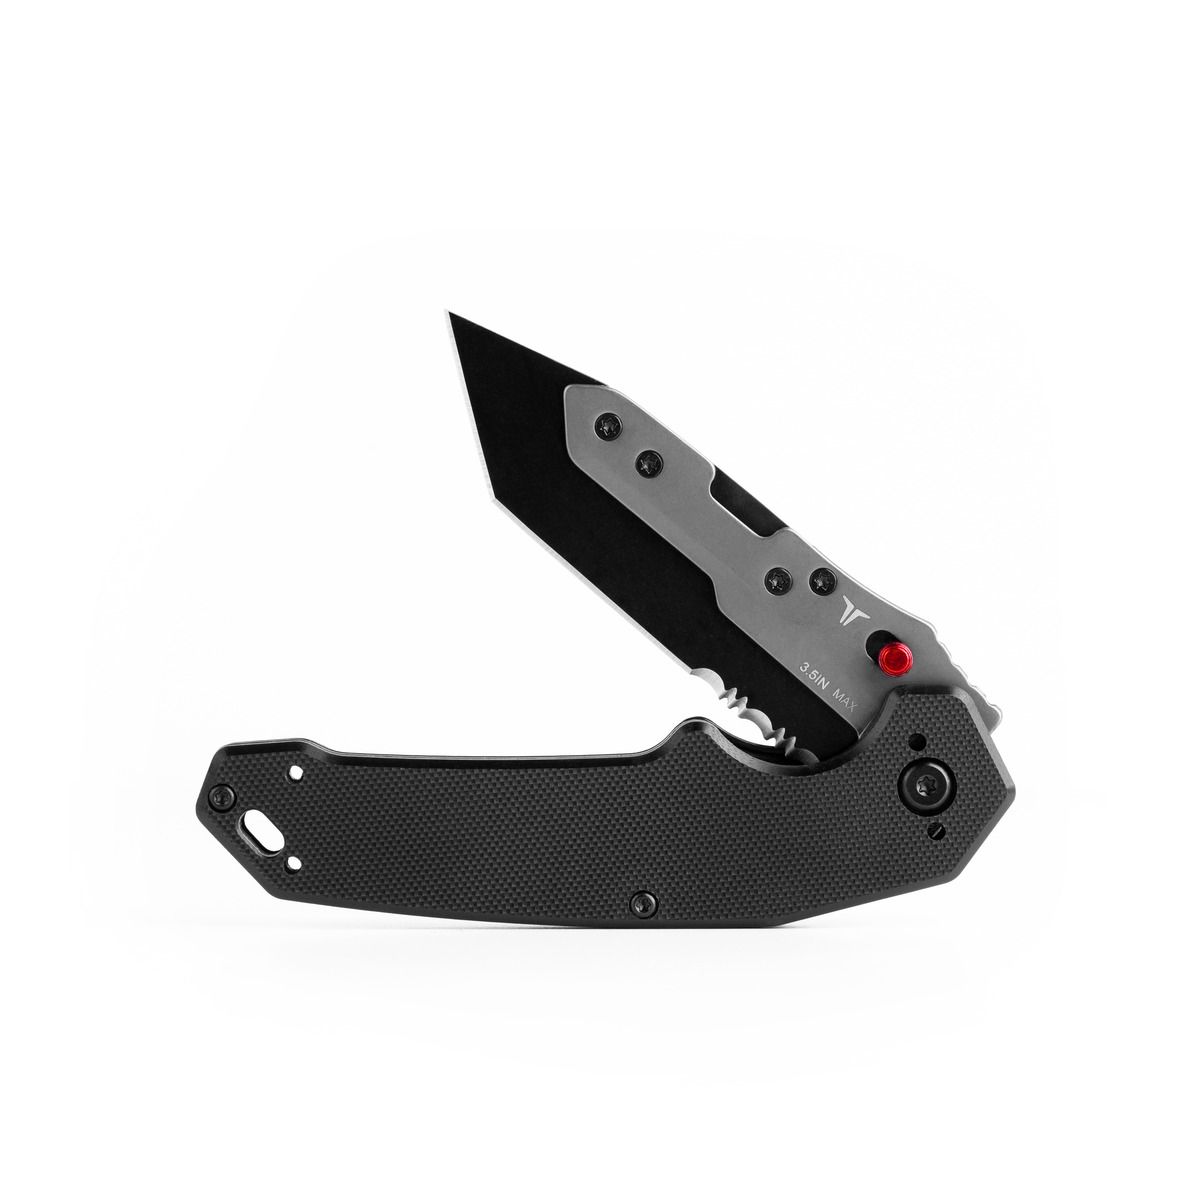 SWIFT EDGE FAST FLIP REPLACEABLE BLADE KNIFE WITH G10 HANDLE - Beacon Laser Creations LLC